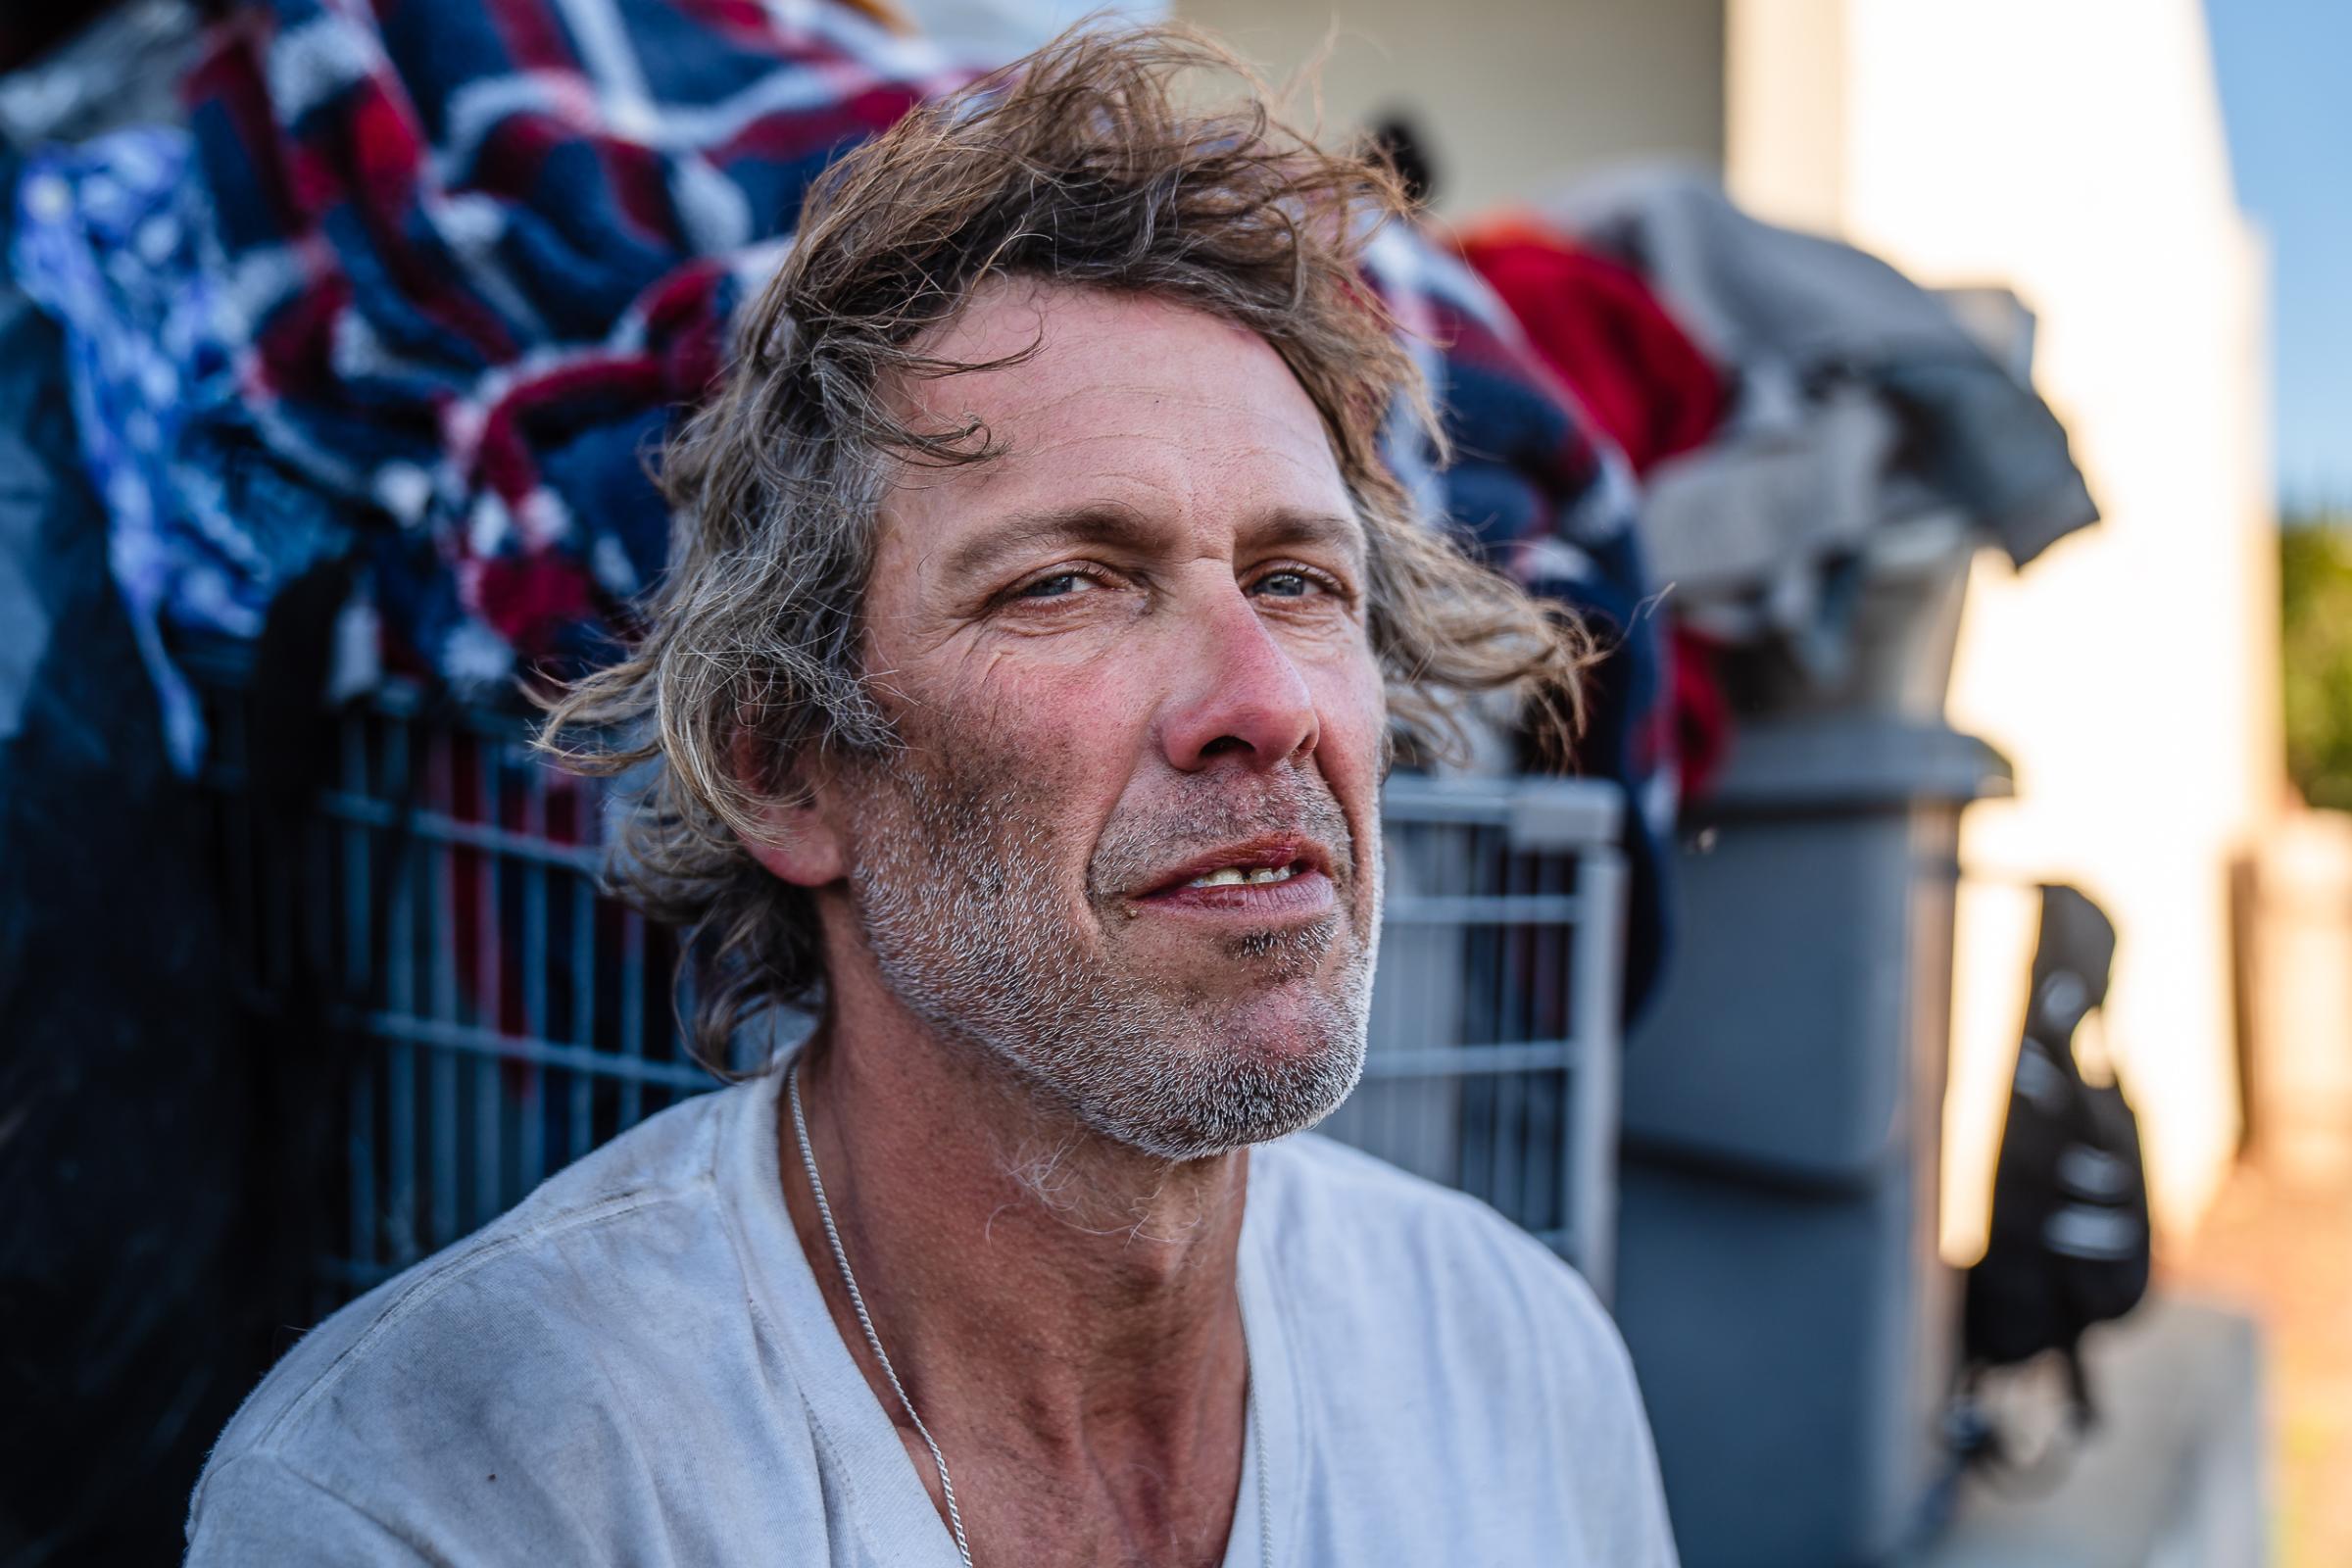  The Faces of Homelessness in San Diego - Josh Nicols, 51, sits in front of a shopping cart with...